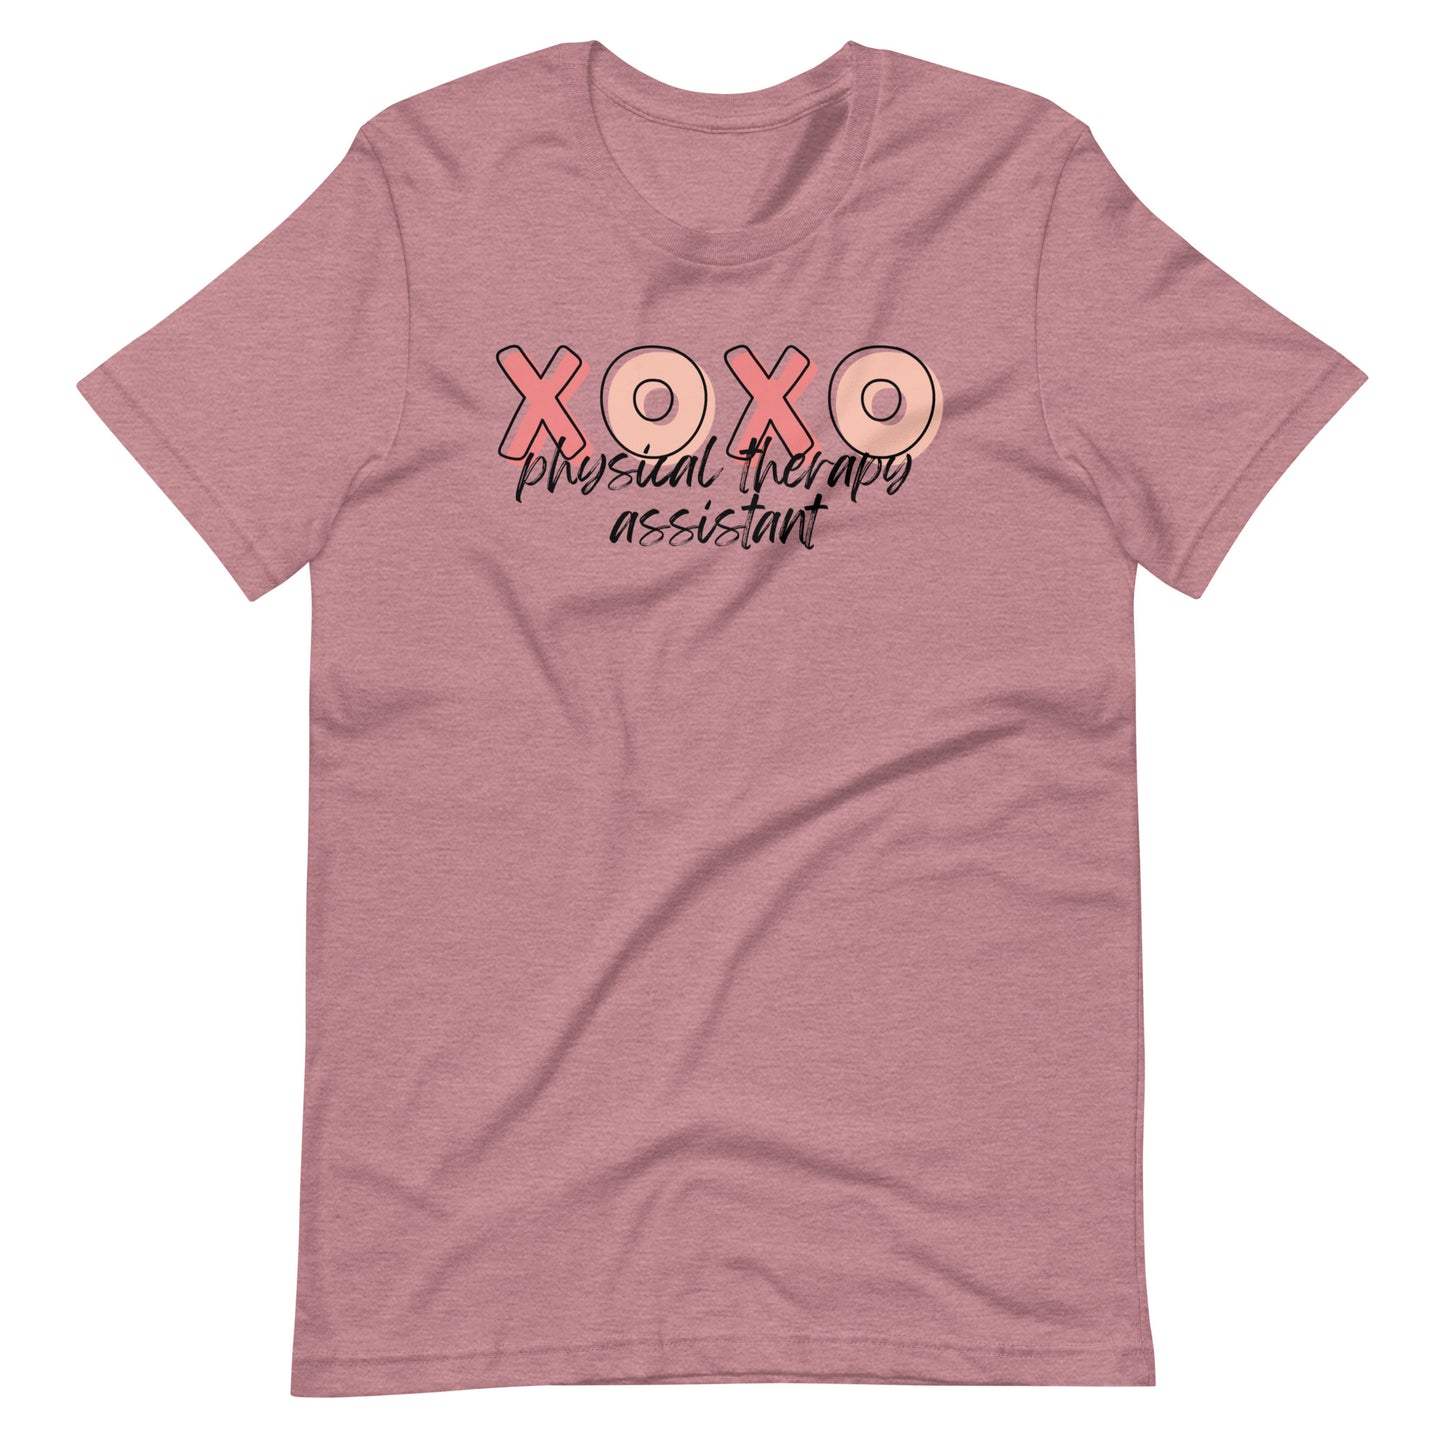 XOXO Physical Therapy Assistant Tee